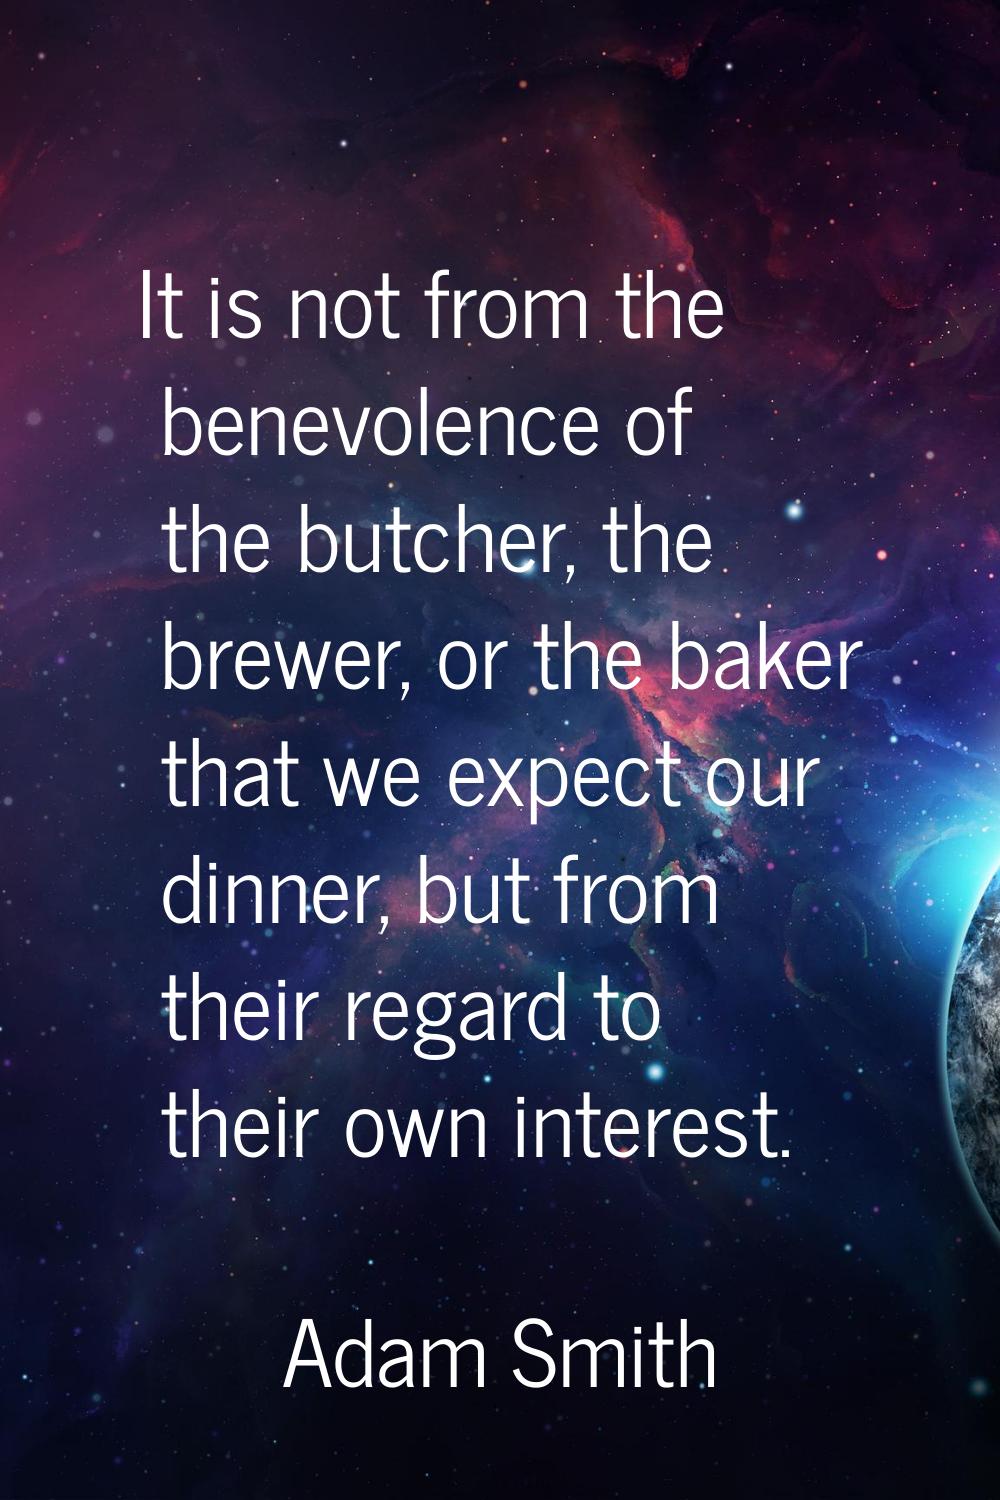 It is not from the benevolence of the butcher, the brewer, or the baker that we expect our dinner, 